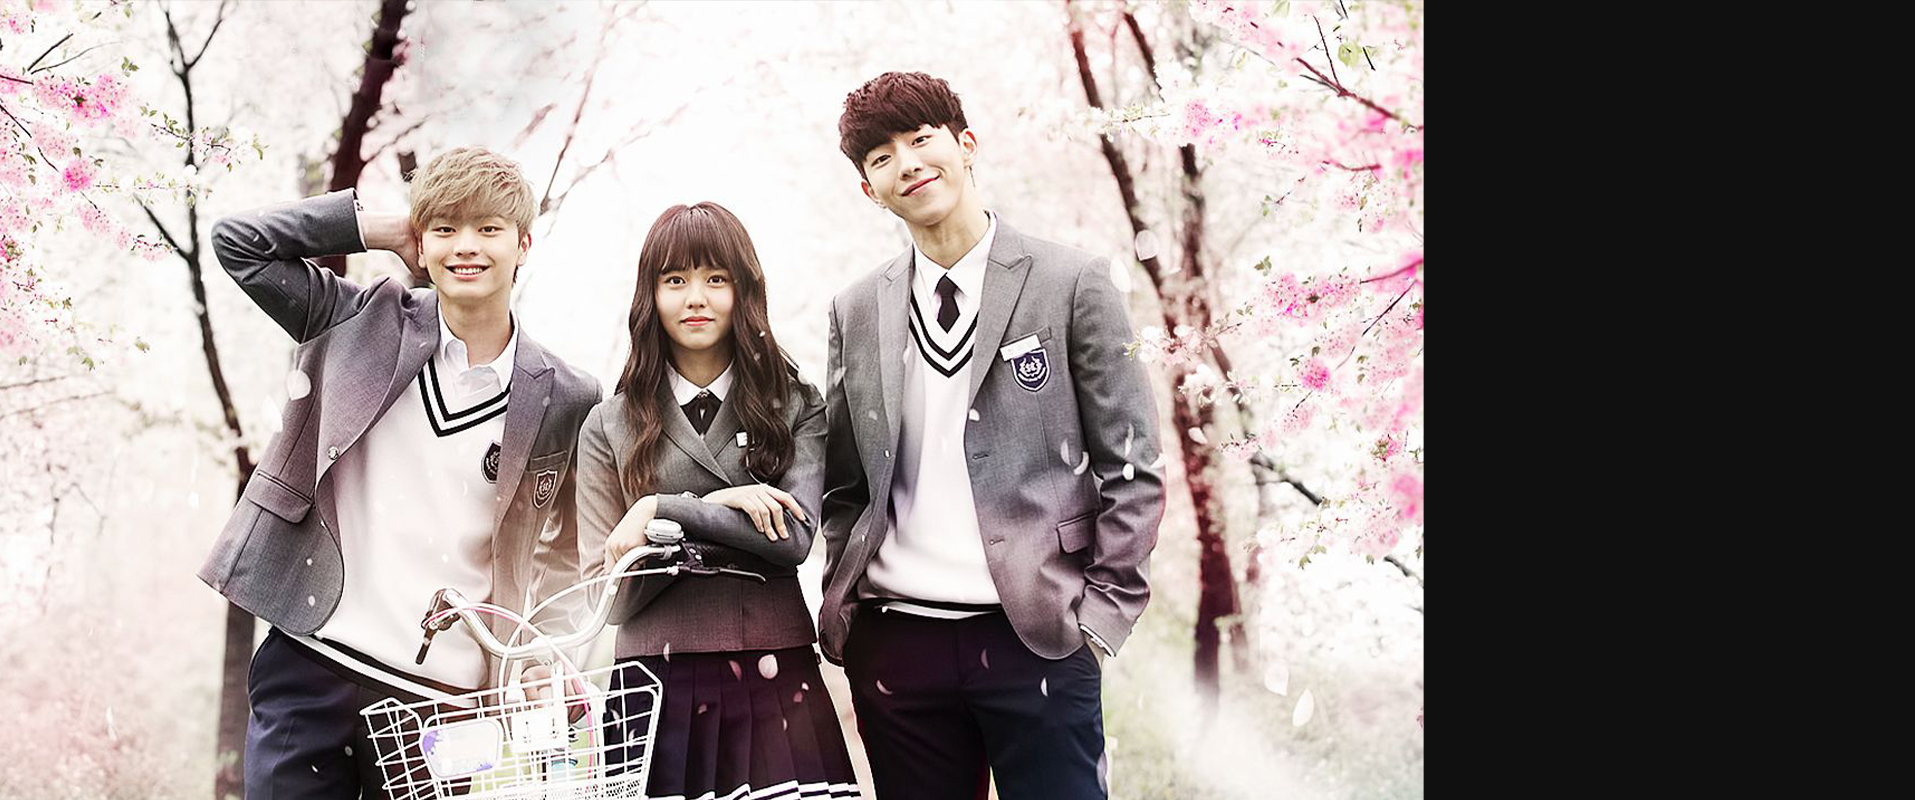 dramacool who are you school 2015